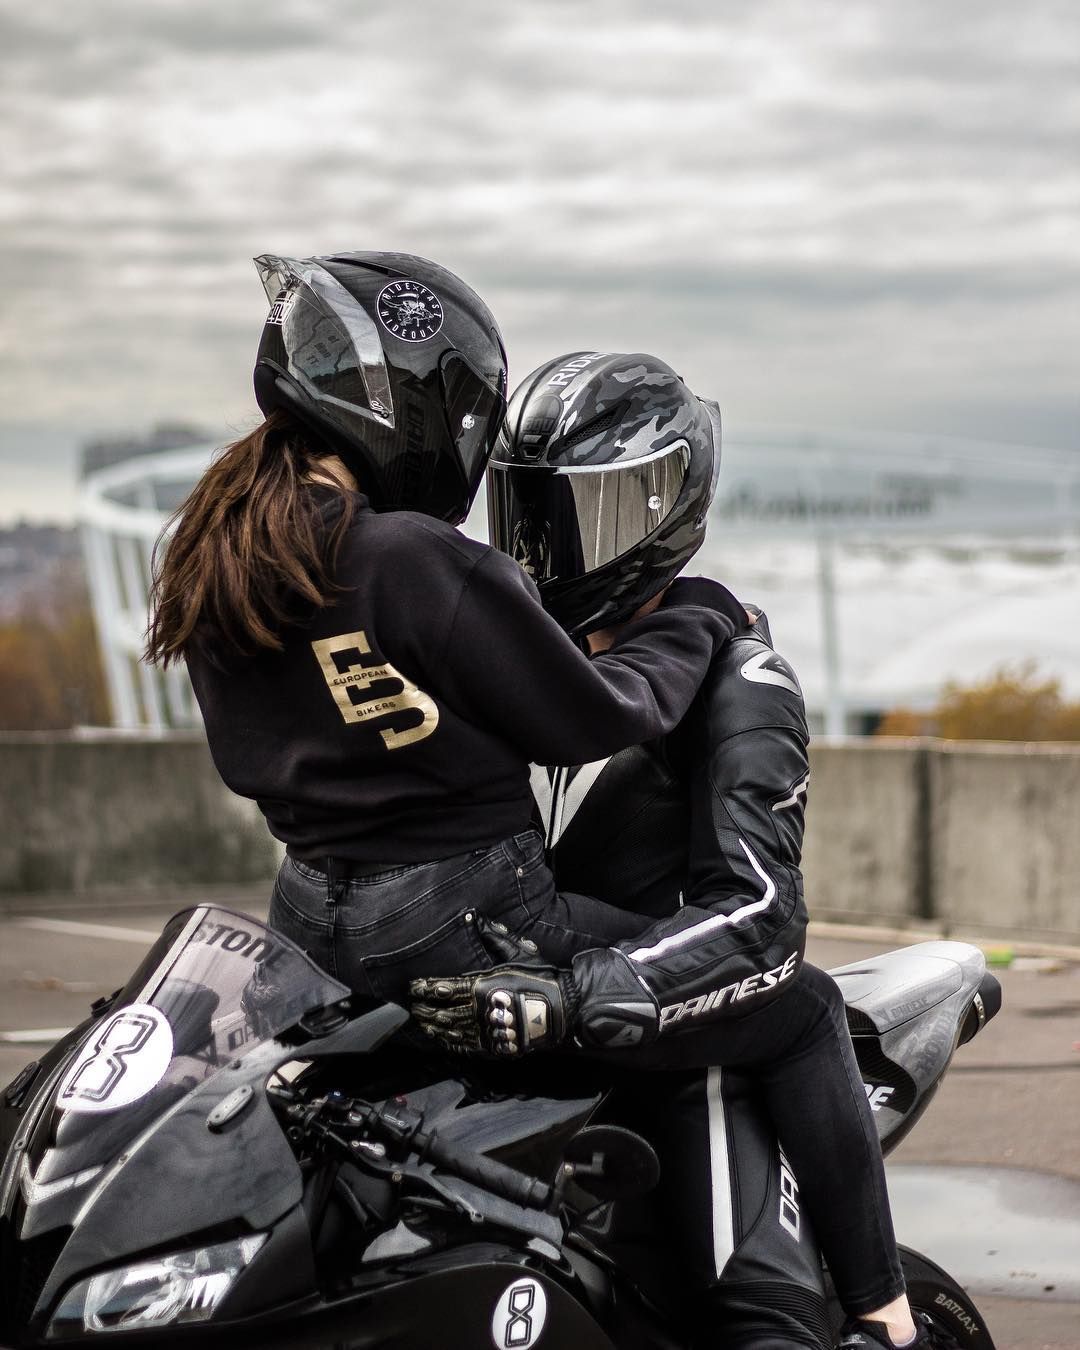 Image may contain: one or more people, motorcycle and outdoor. Biker love, Biker couple, Bike couple